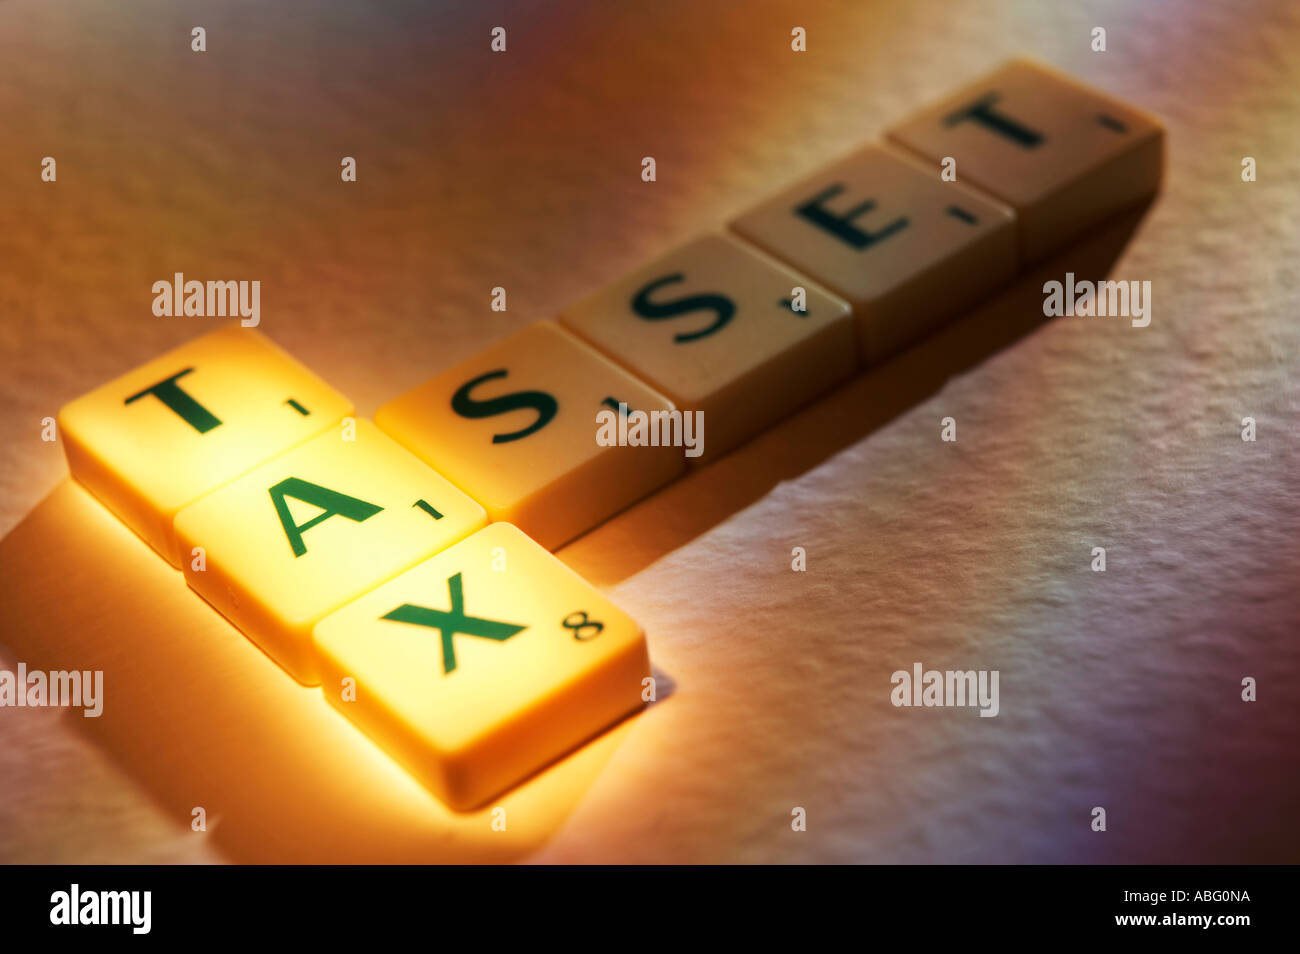 SCRABBLE BOARD GAME LETTERS SPELLING THE WORDS TAX ASSET Stock Photo